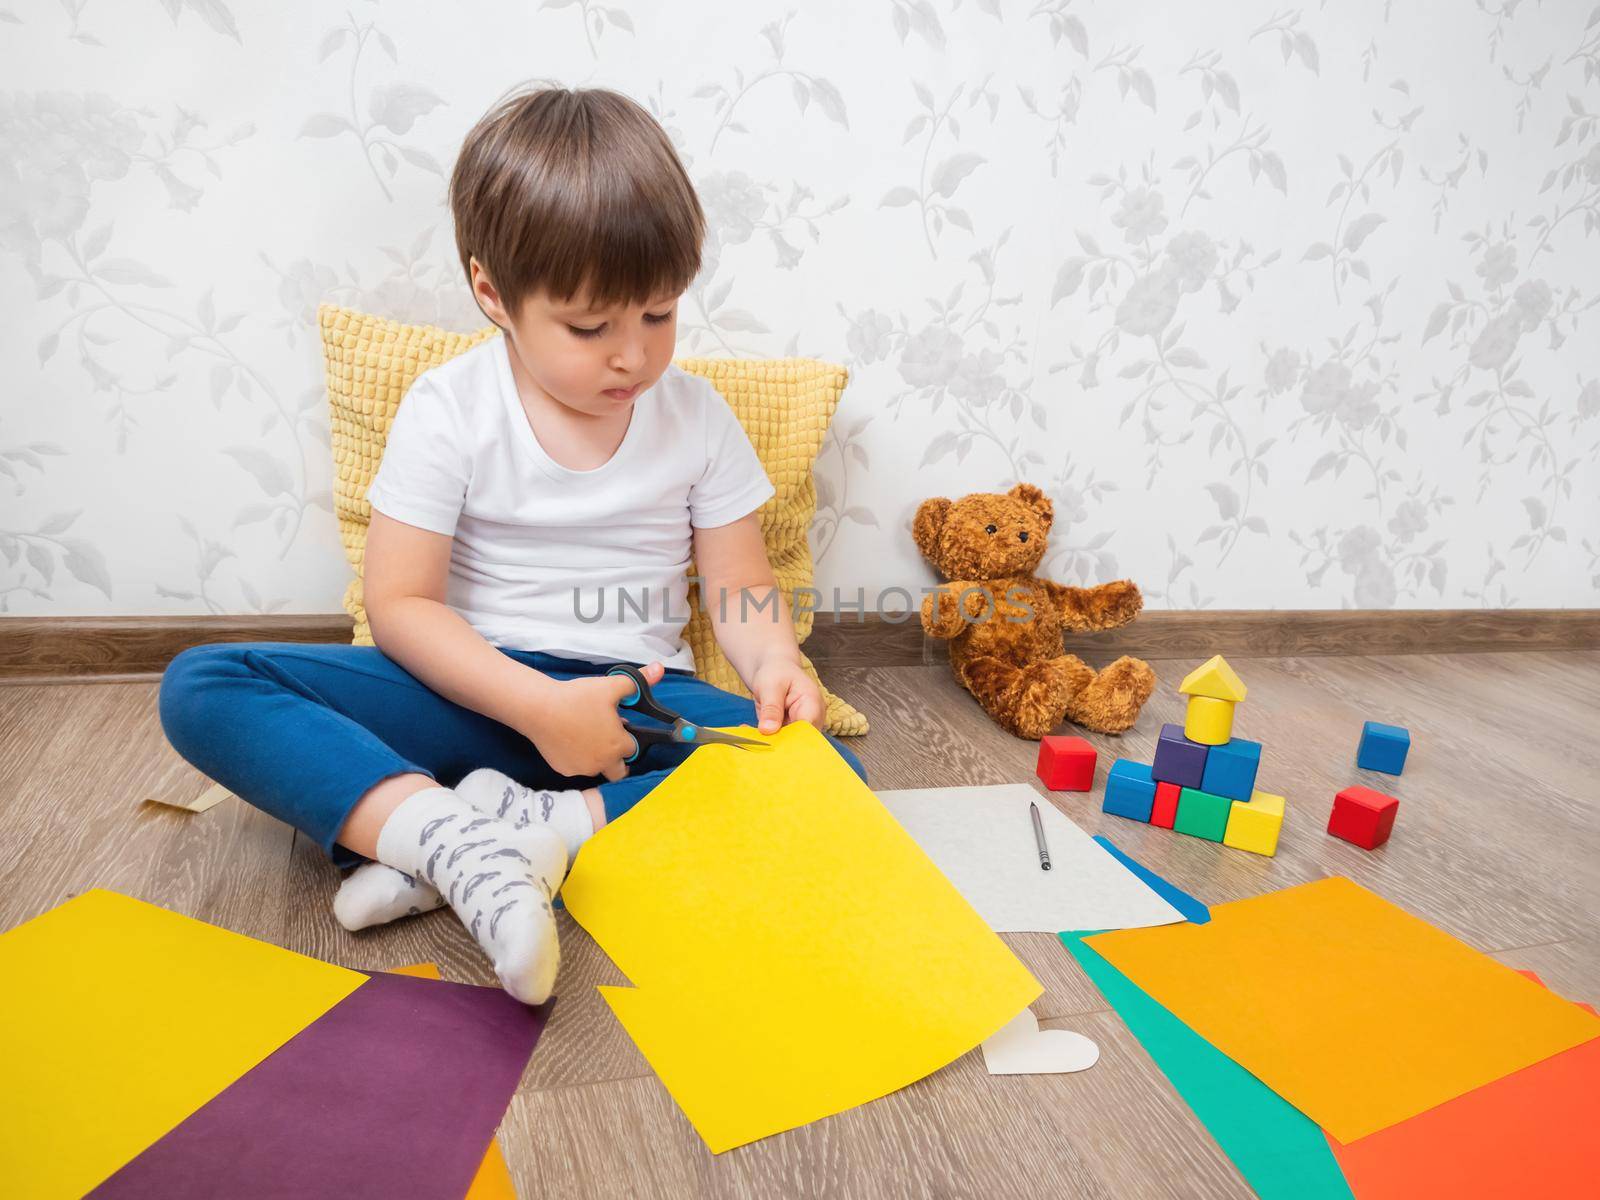 Toddler boy learns to cut colored paper with scissors. Kid sits on floor in kids room with toy blocks and teddy bear. Educational classes for children. Developing feeling sensations and fine motor skills at home. by aksenovko